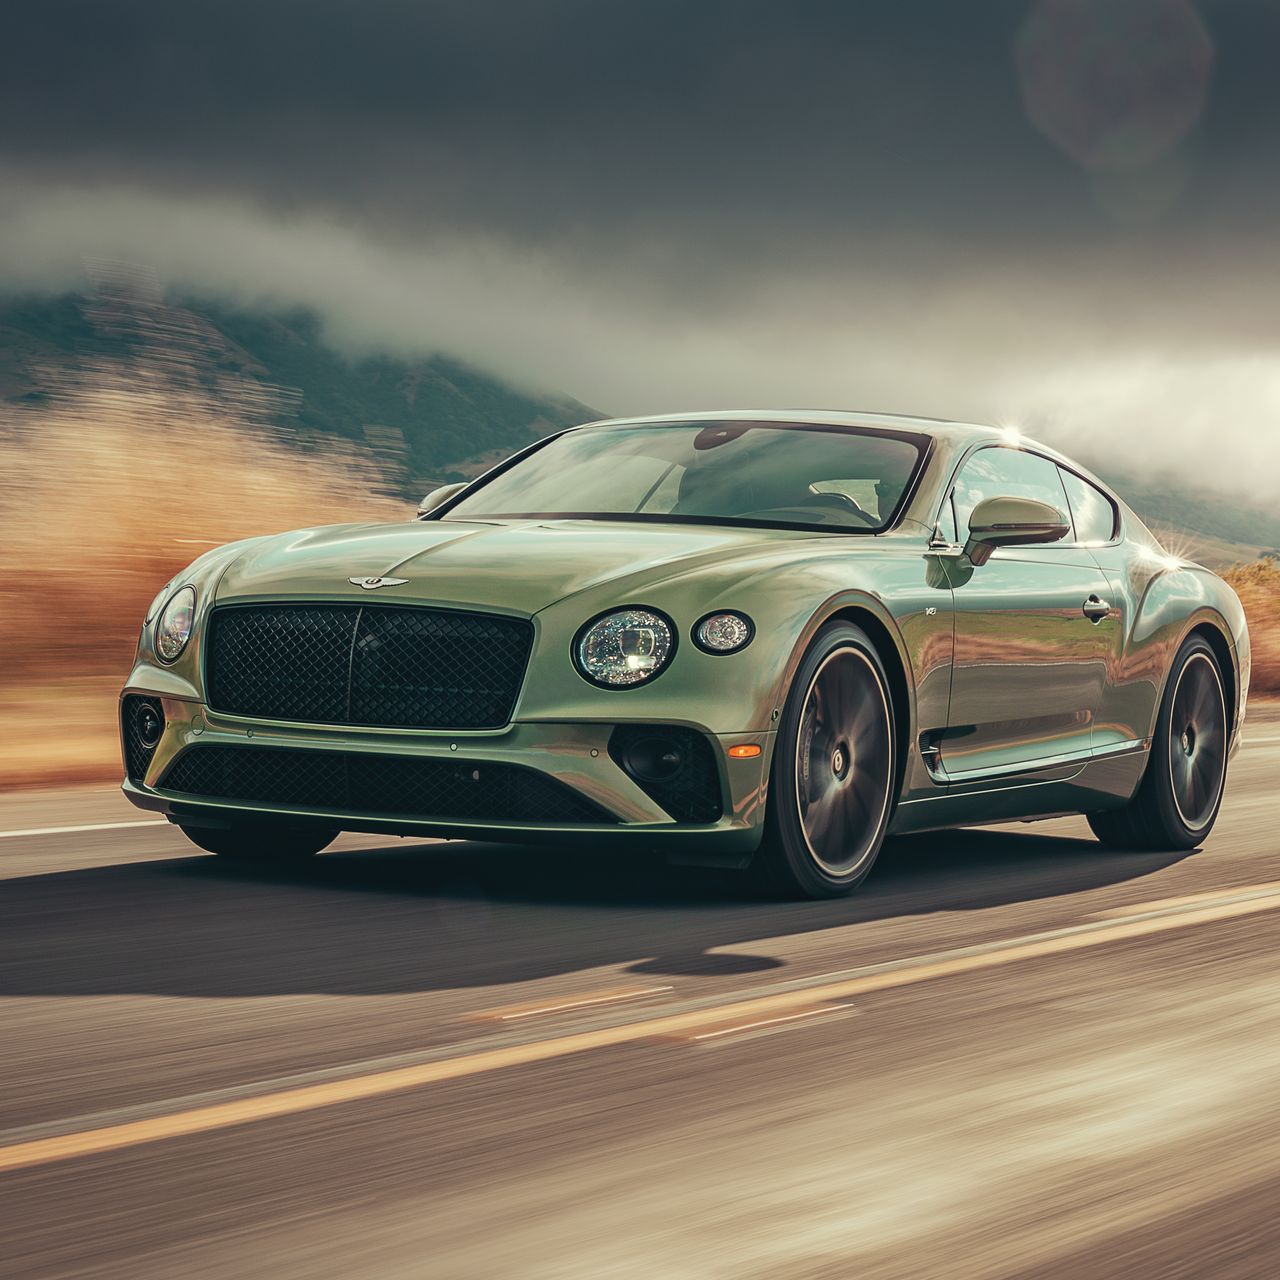 The 2020 Bentley Continental GT V8 is in Rarefied Air | Barron's